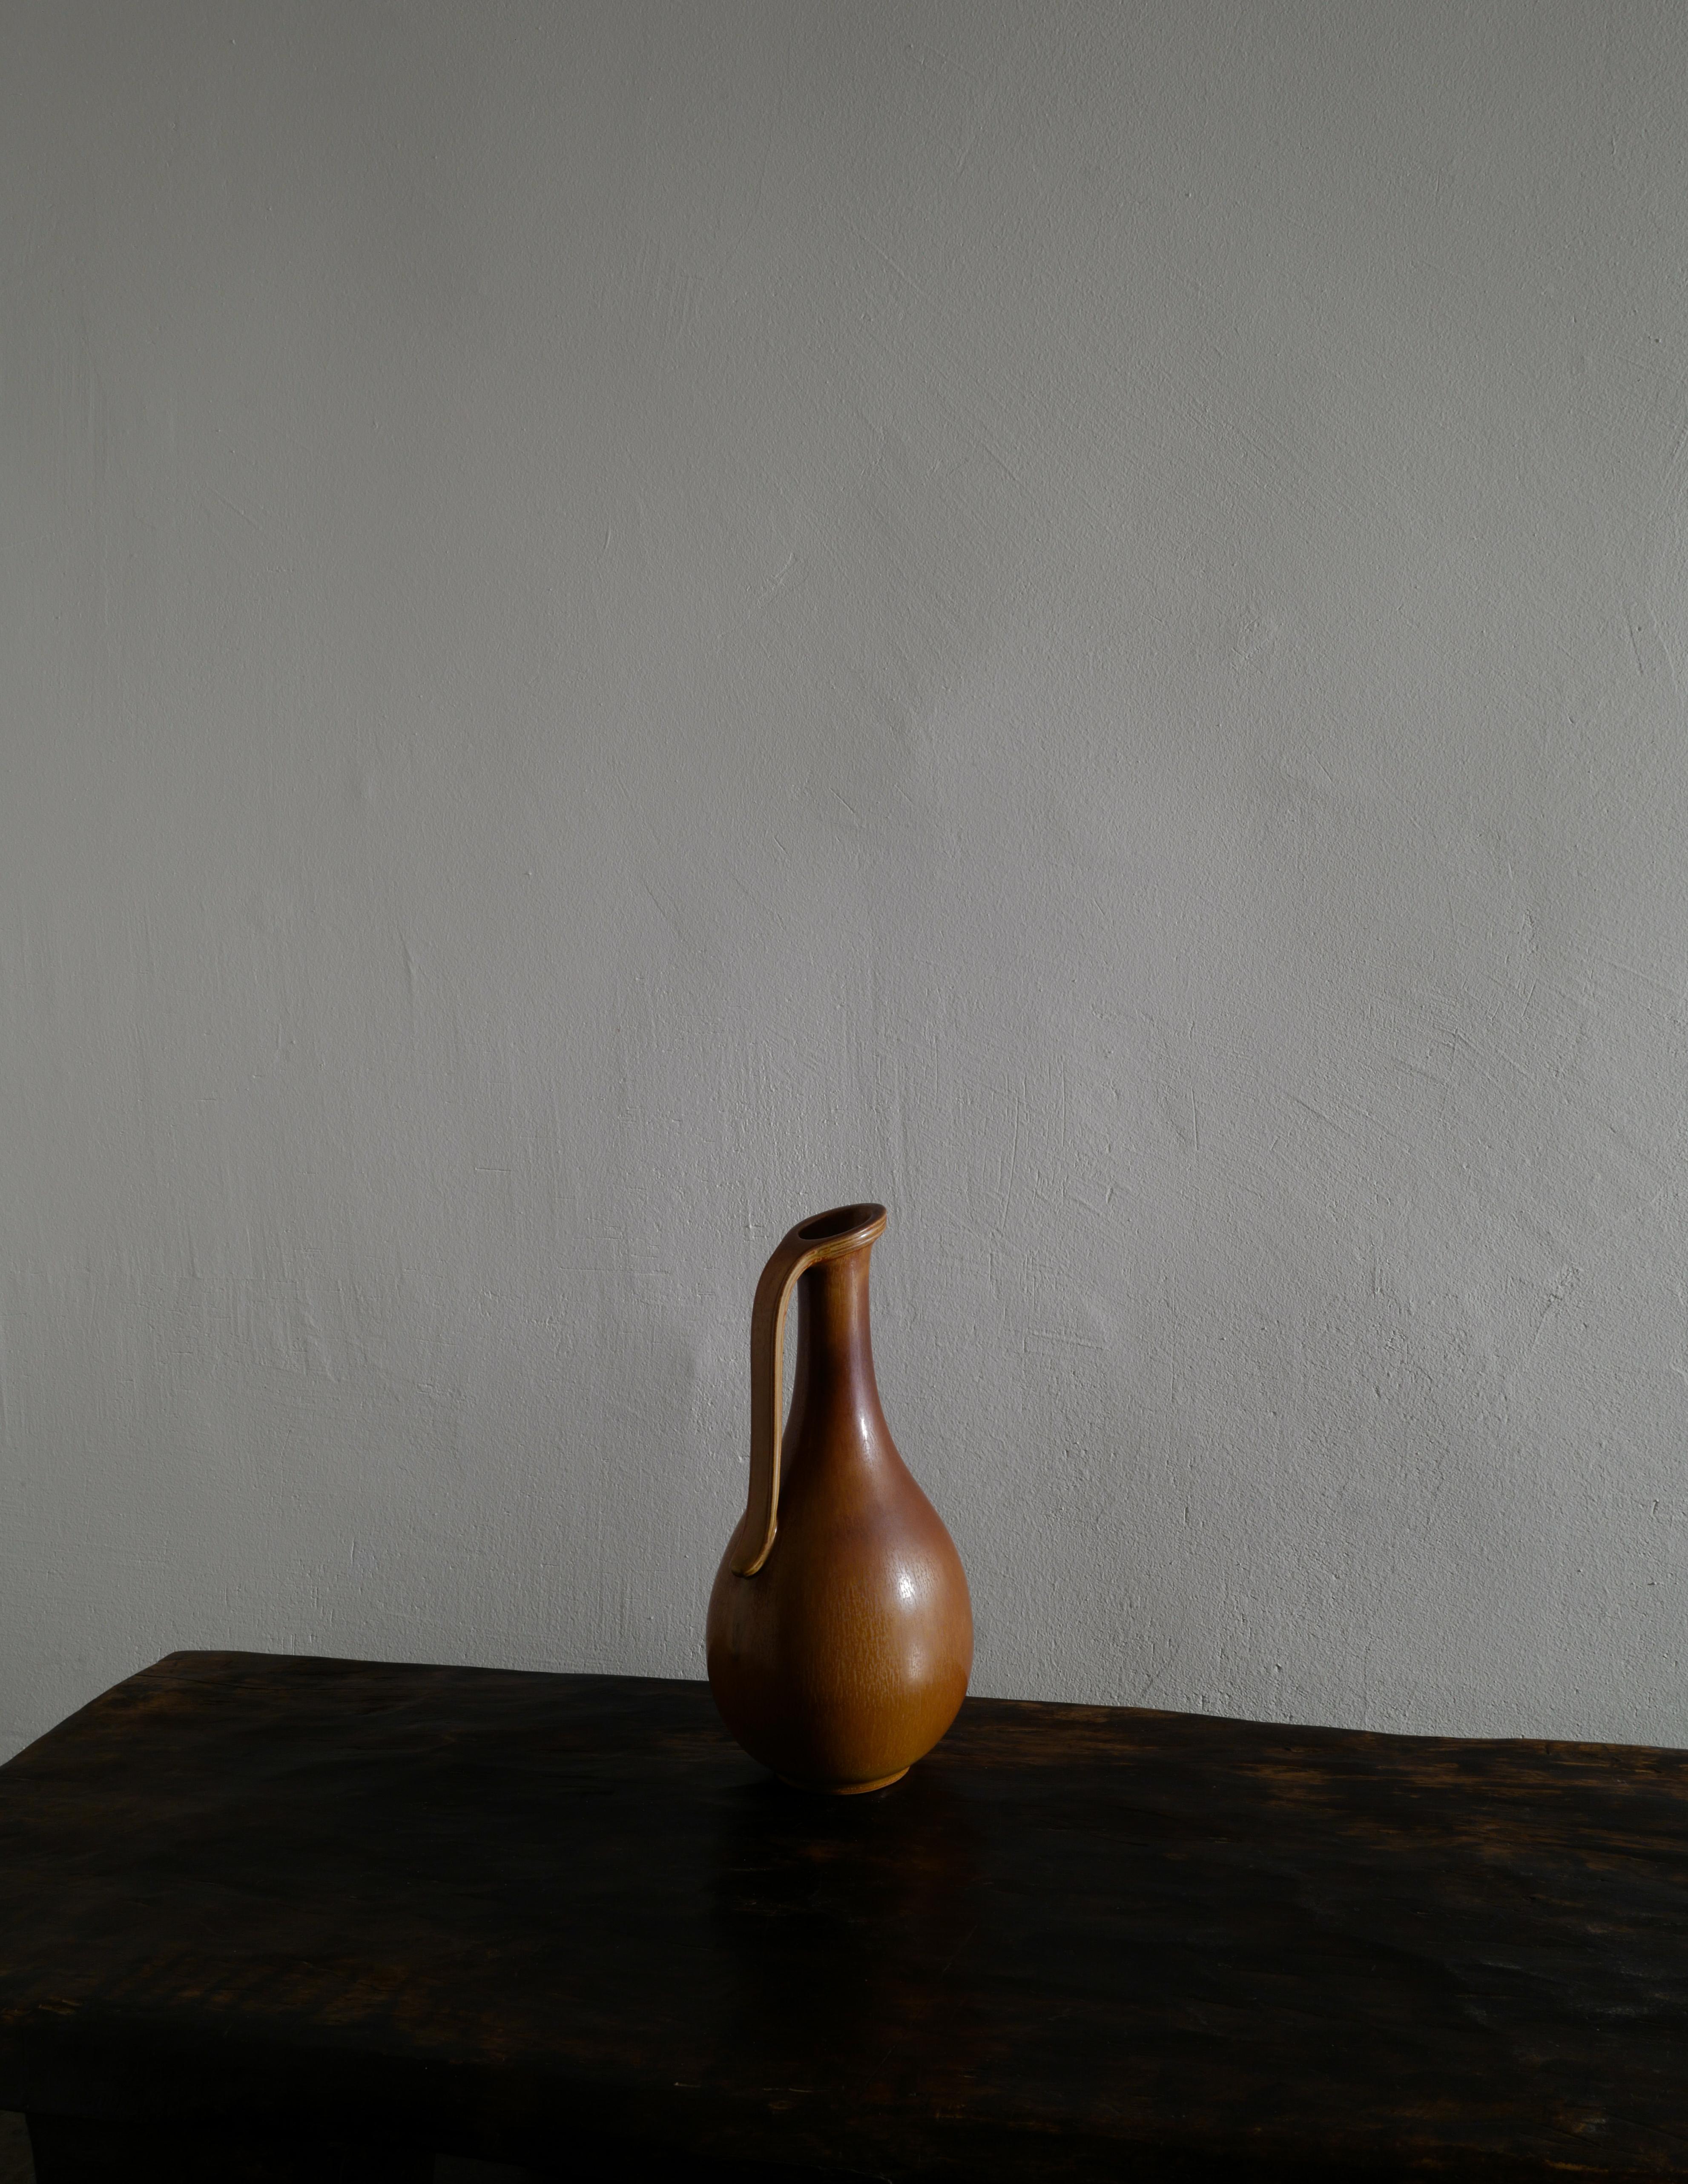 Rare ceramic mid century pitcher vase by Gunnar Nylund for Rörstrand Studio in Sweden produced in the 1950s. In good vintage condition with minimal signs from age and use. 

Dimensions: Height: 35 cm.